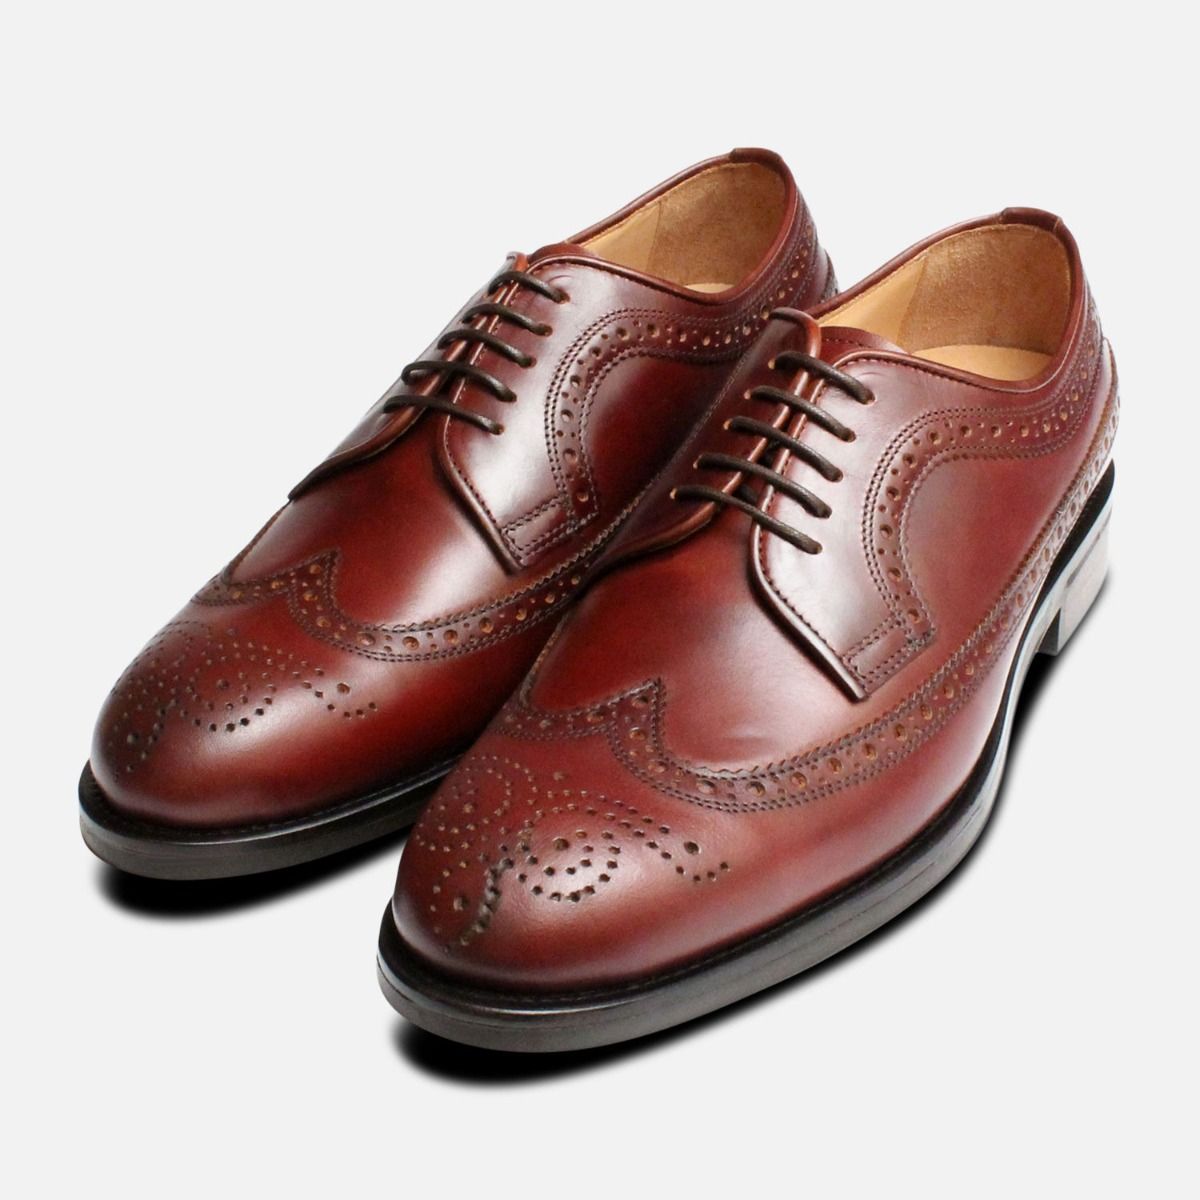 Rich Brown Longwing Brogues by John White Shoes